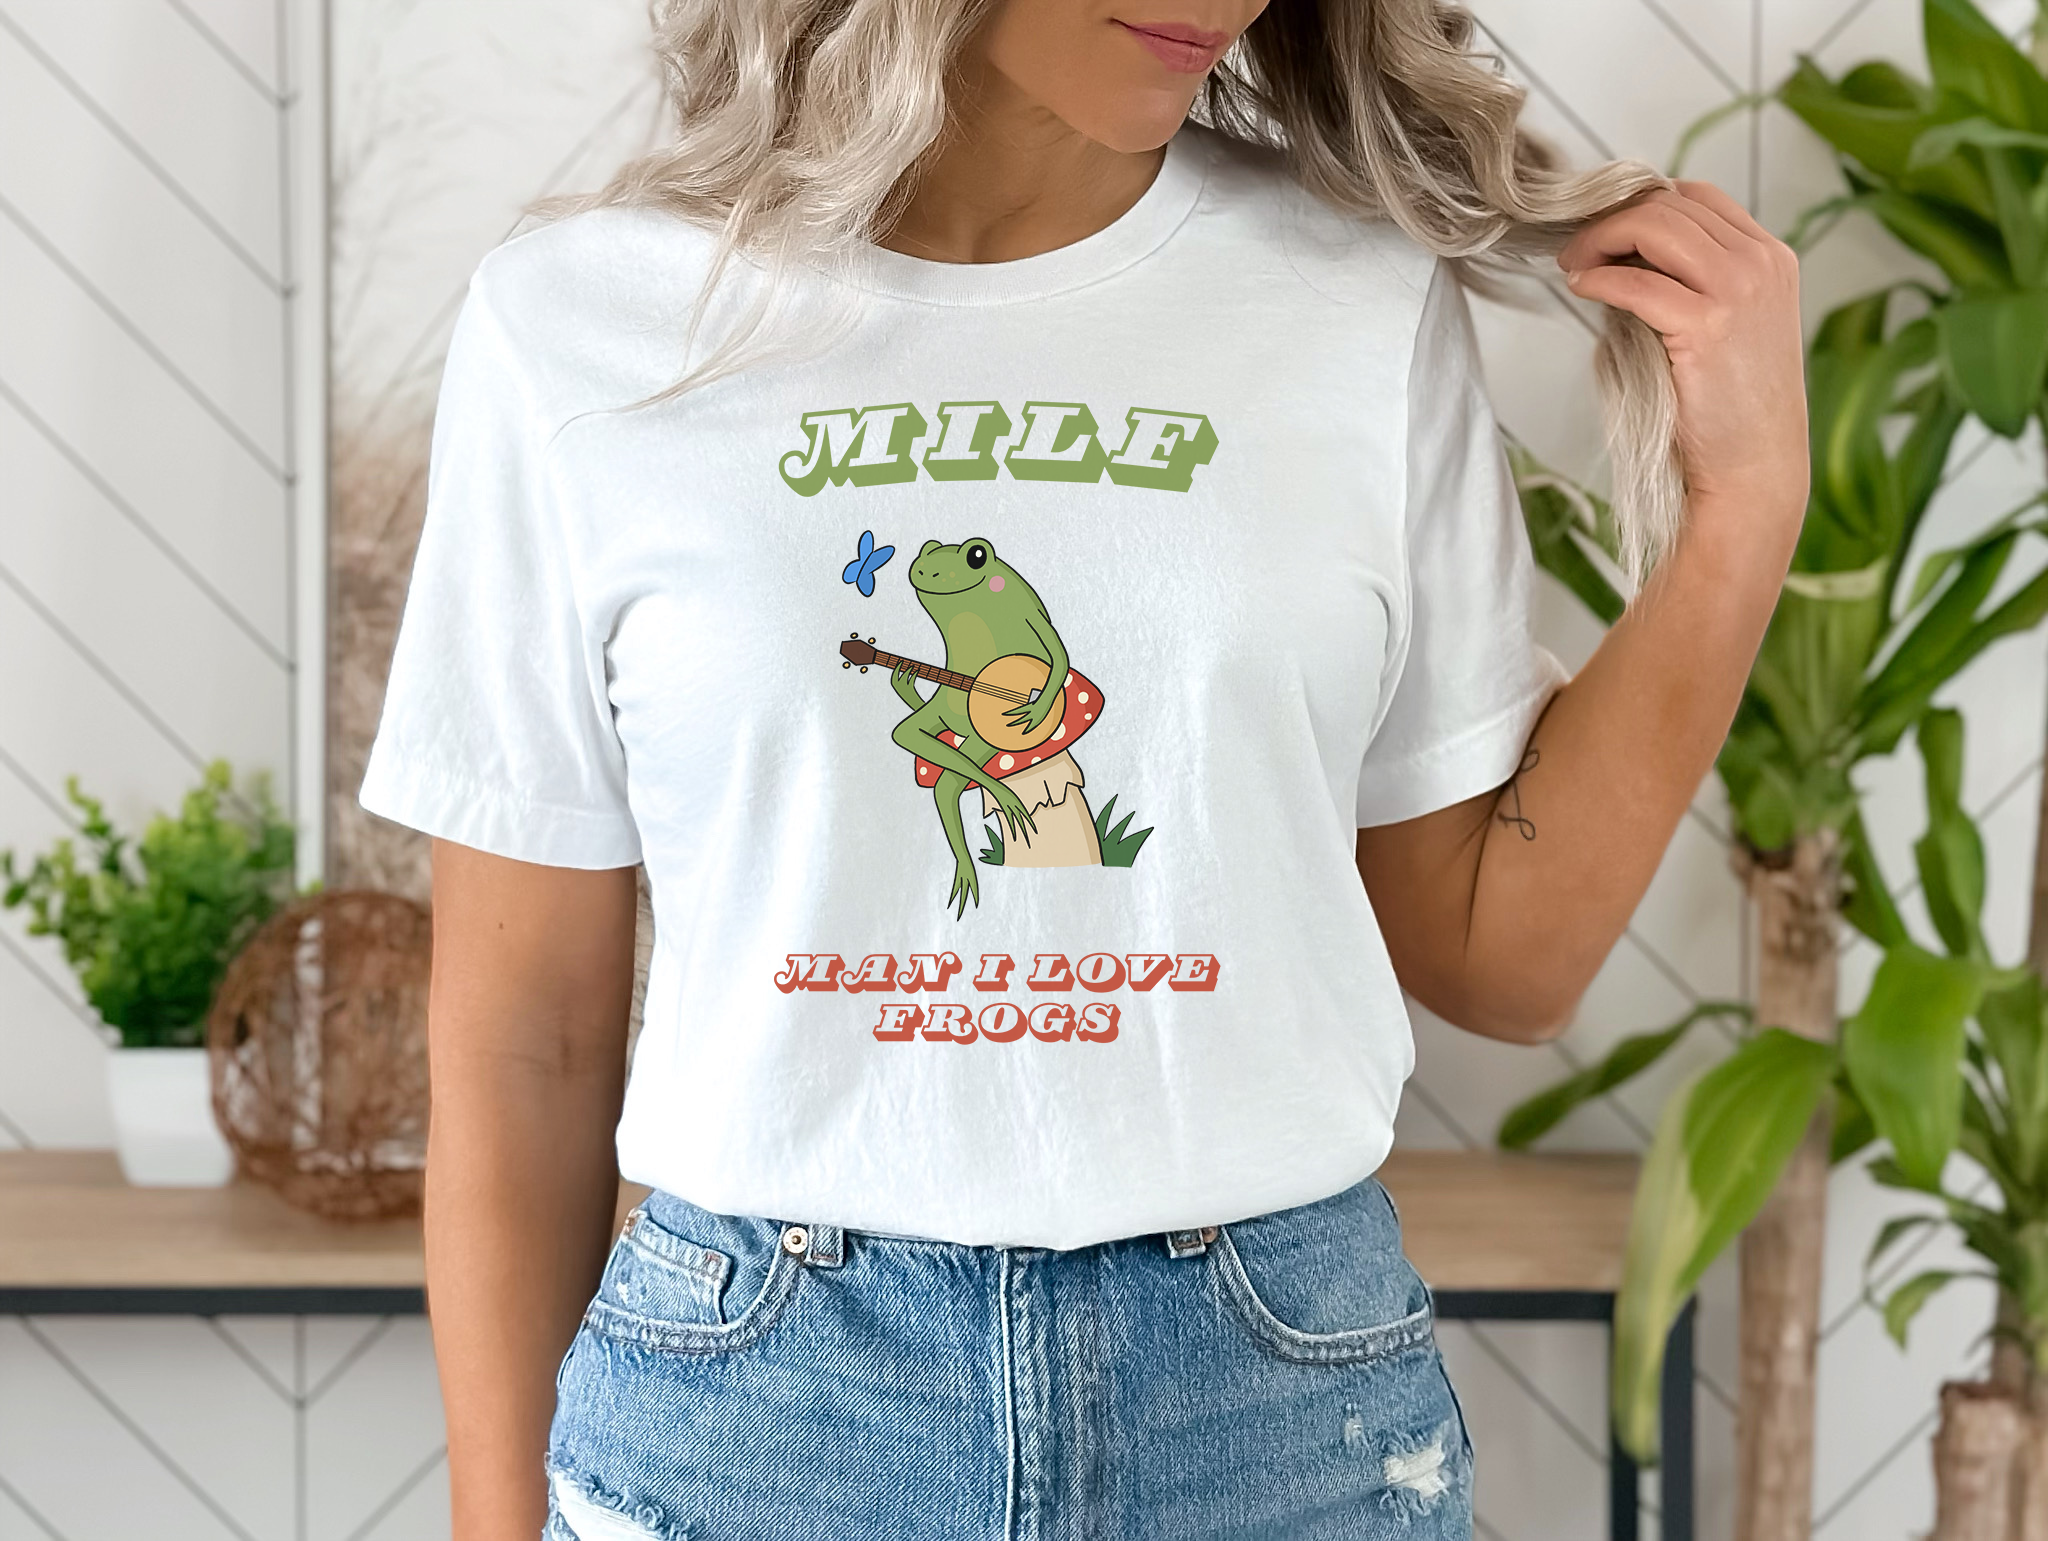 Retro Frog Shirt, Funny MILF Froggy Shirt, Cottagecore Froggy Tee, Oversized UNISEX T-shirt, Toad Shirt, Frog Lover shirt, Man I love frogs